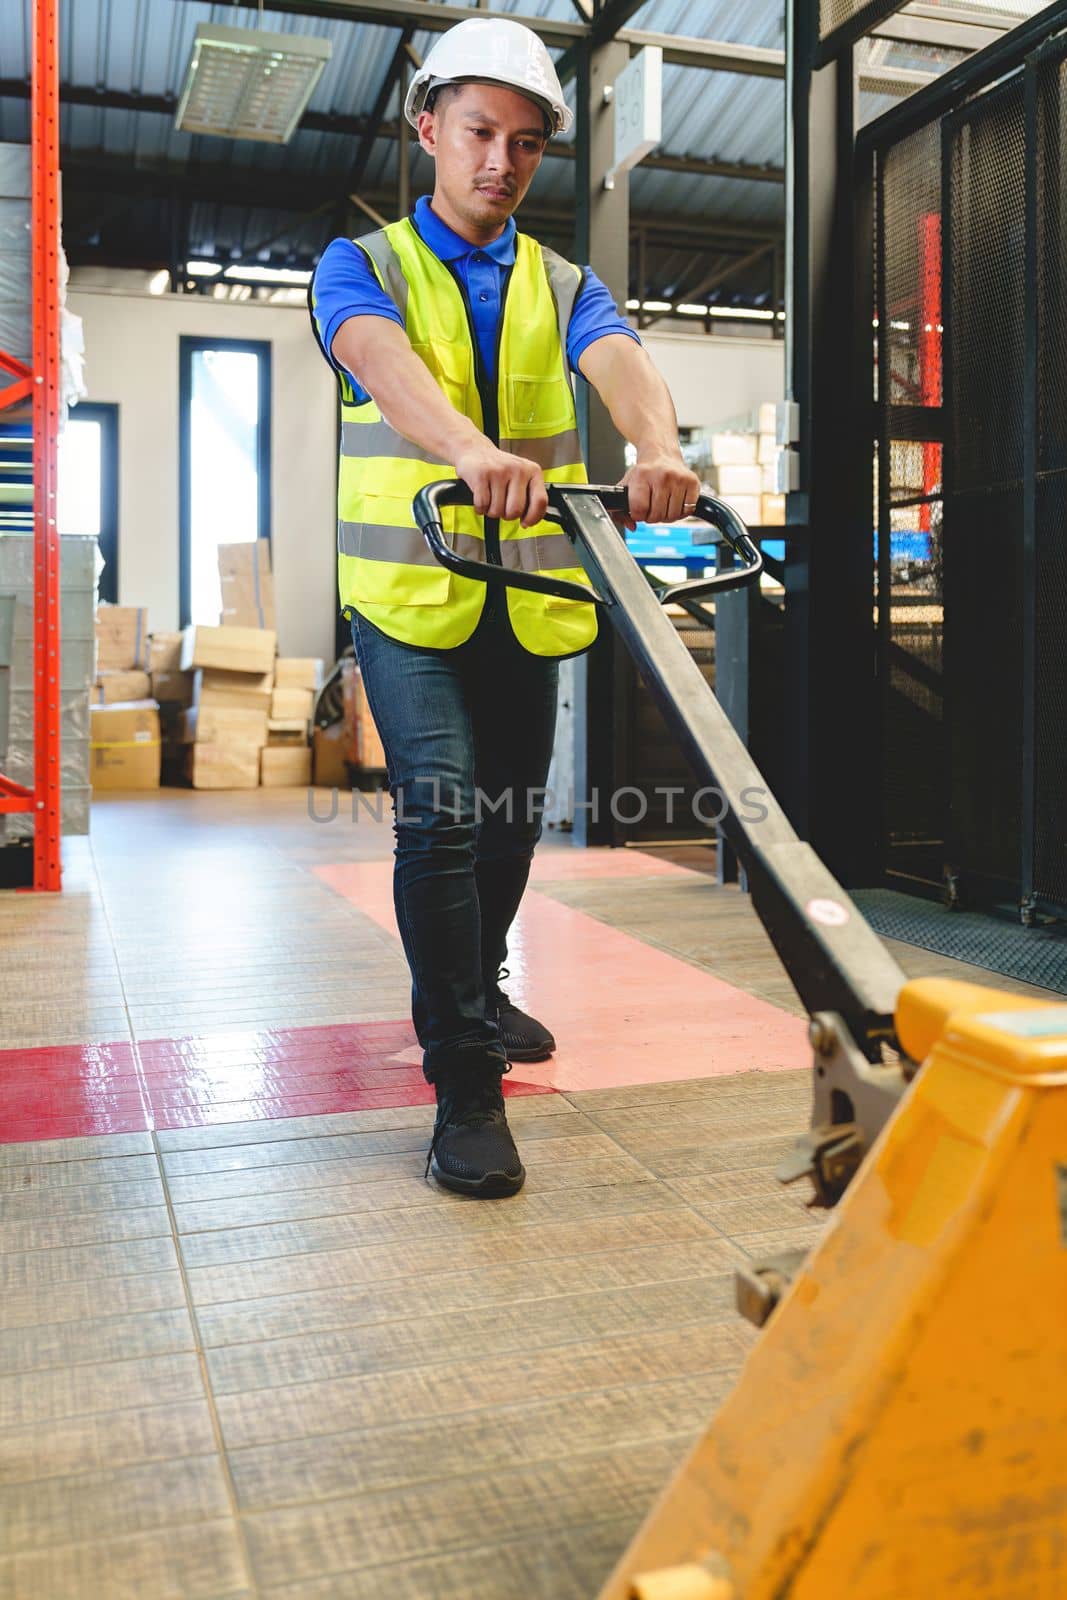 Asian male warehouse worker pulling a pallet truck. Worker working with hand pallet truck unloading cargo boxes on pallet at the warehouse